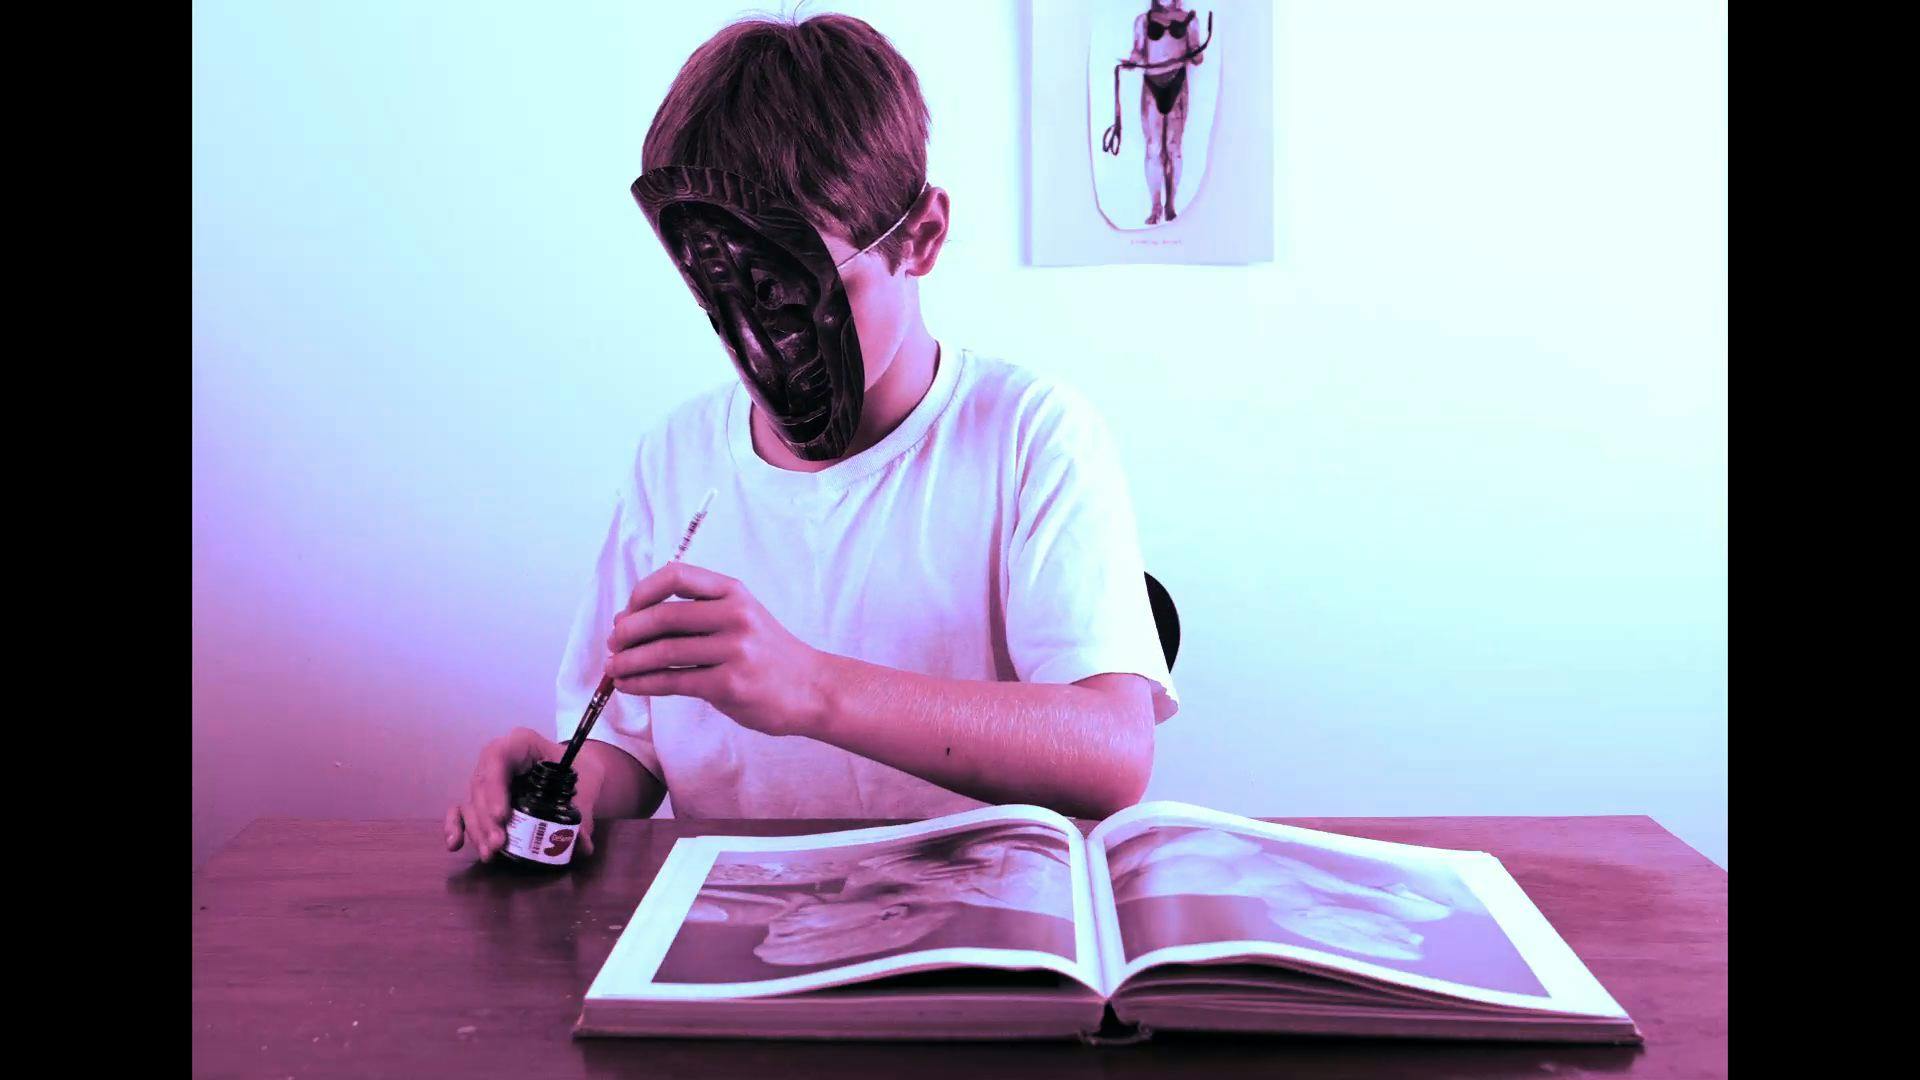 A child, wearing a mask and dipping a brush into an ink bottle, sits in front of an open book with photos of statues. A print hangs on the wall in the background. The entire image has a magenta hue.